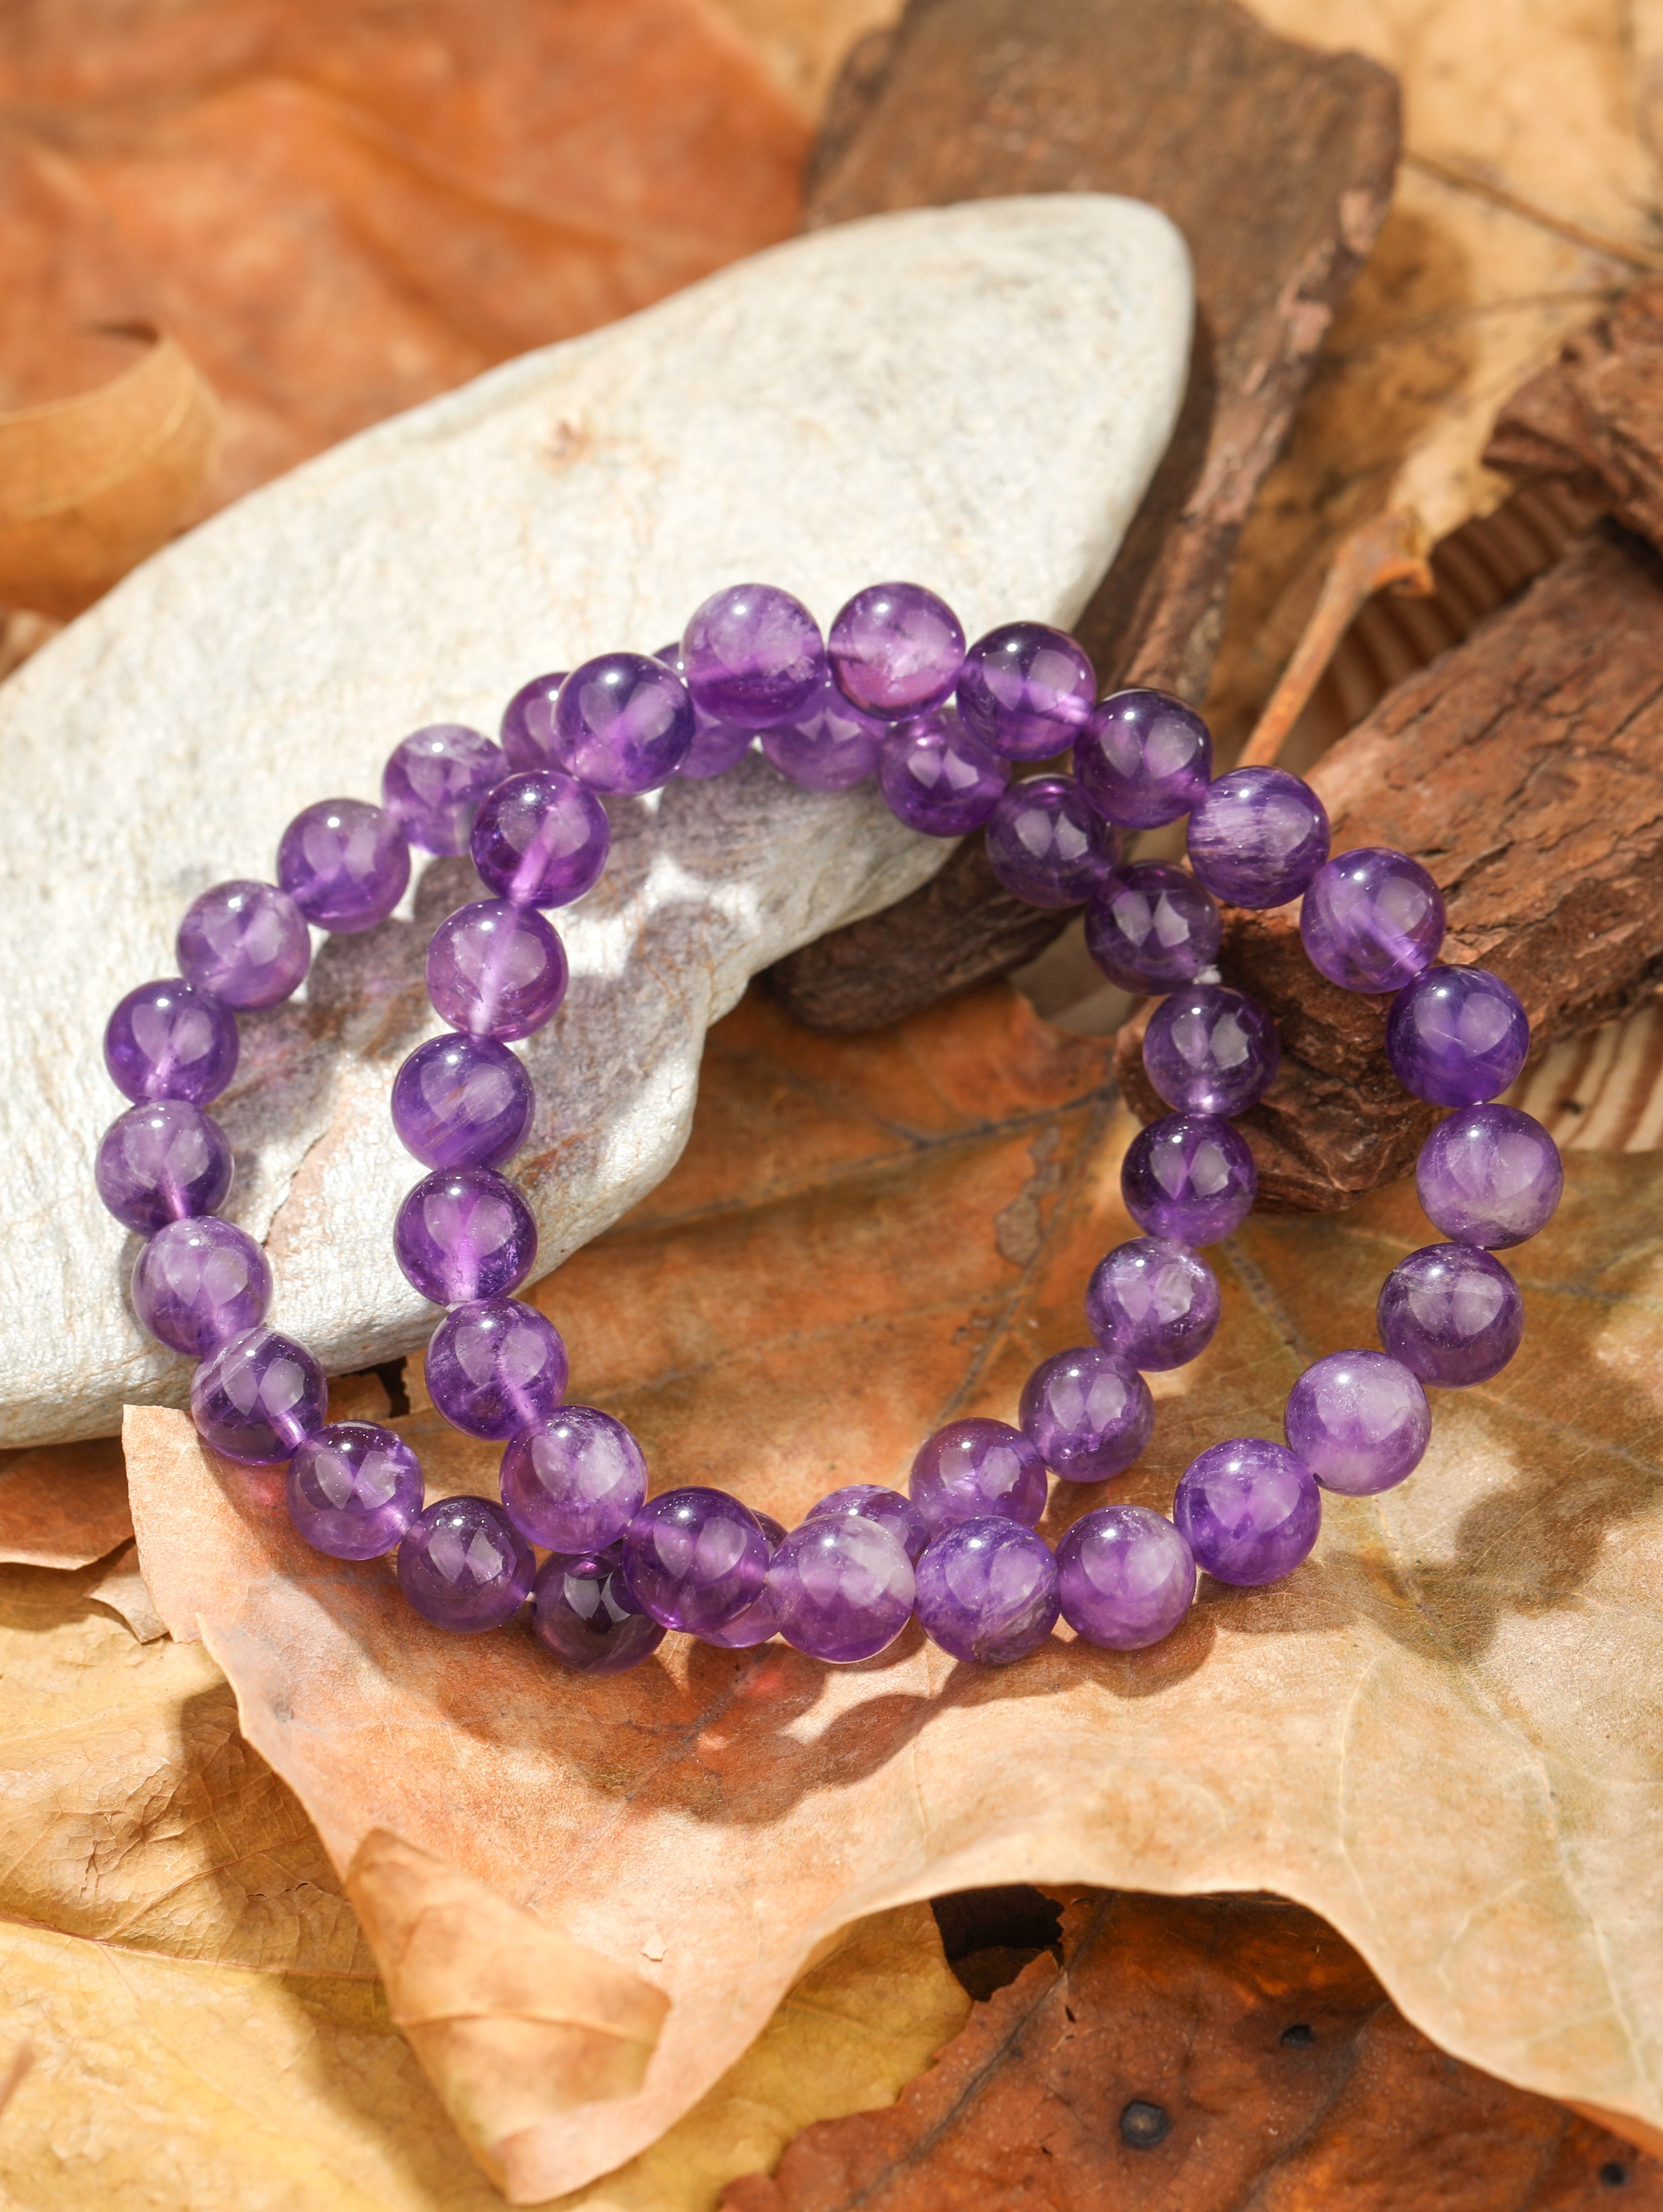 8mm Natural Amethyst Crystal Energy Stone Elastic Stretchable